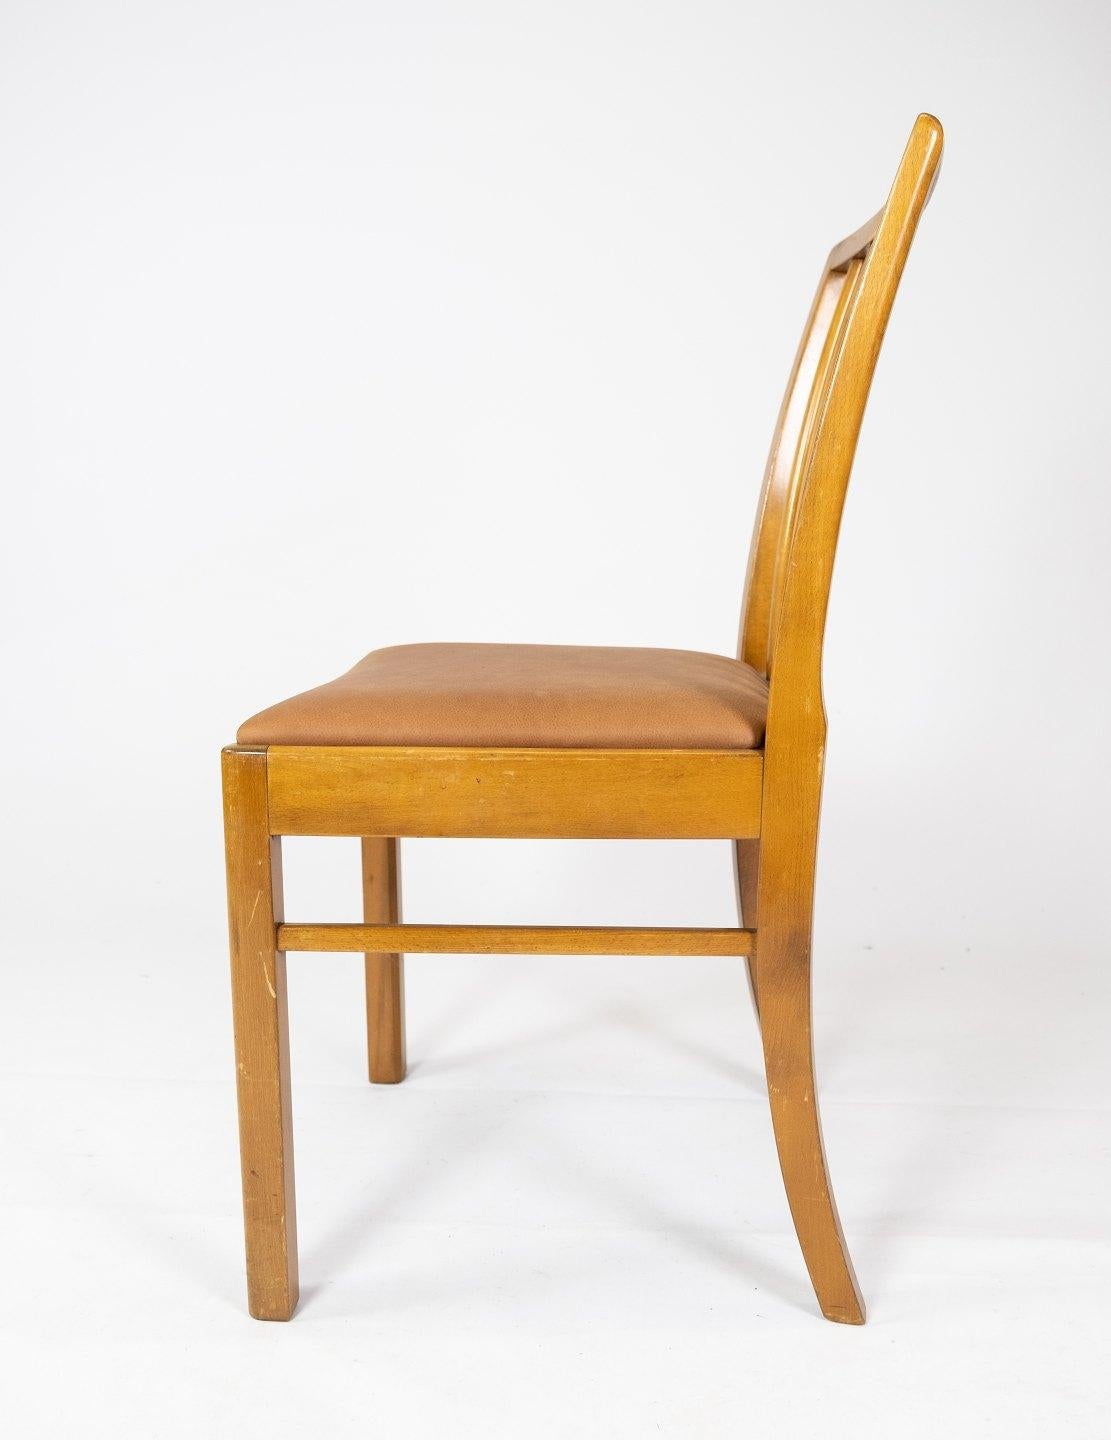 Art Deco Set of 10 Dining Room Chairs of Light Wood and Cognac Leather, 1940s For Sale 2